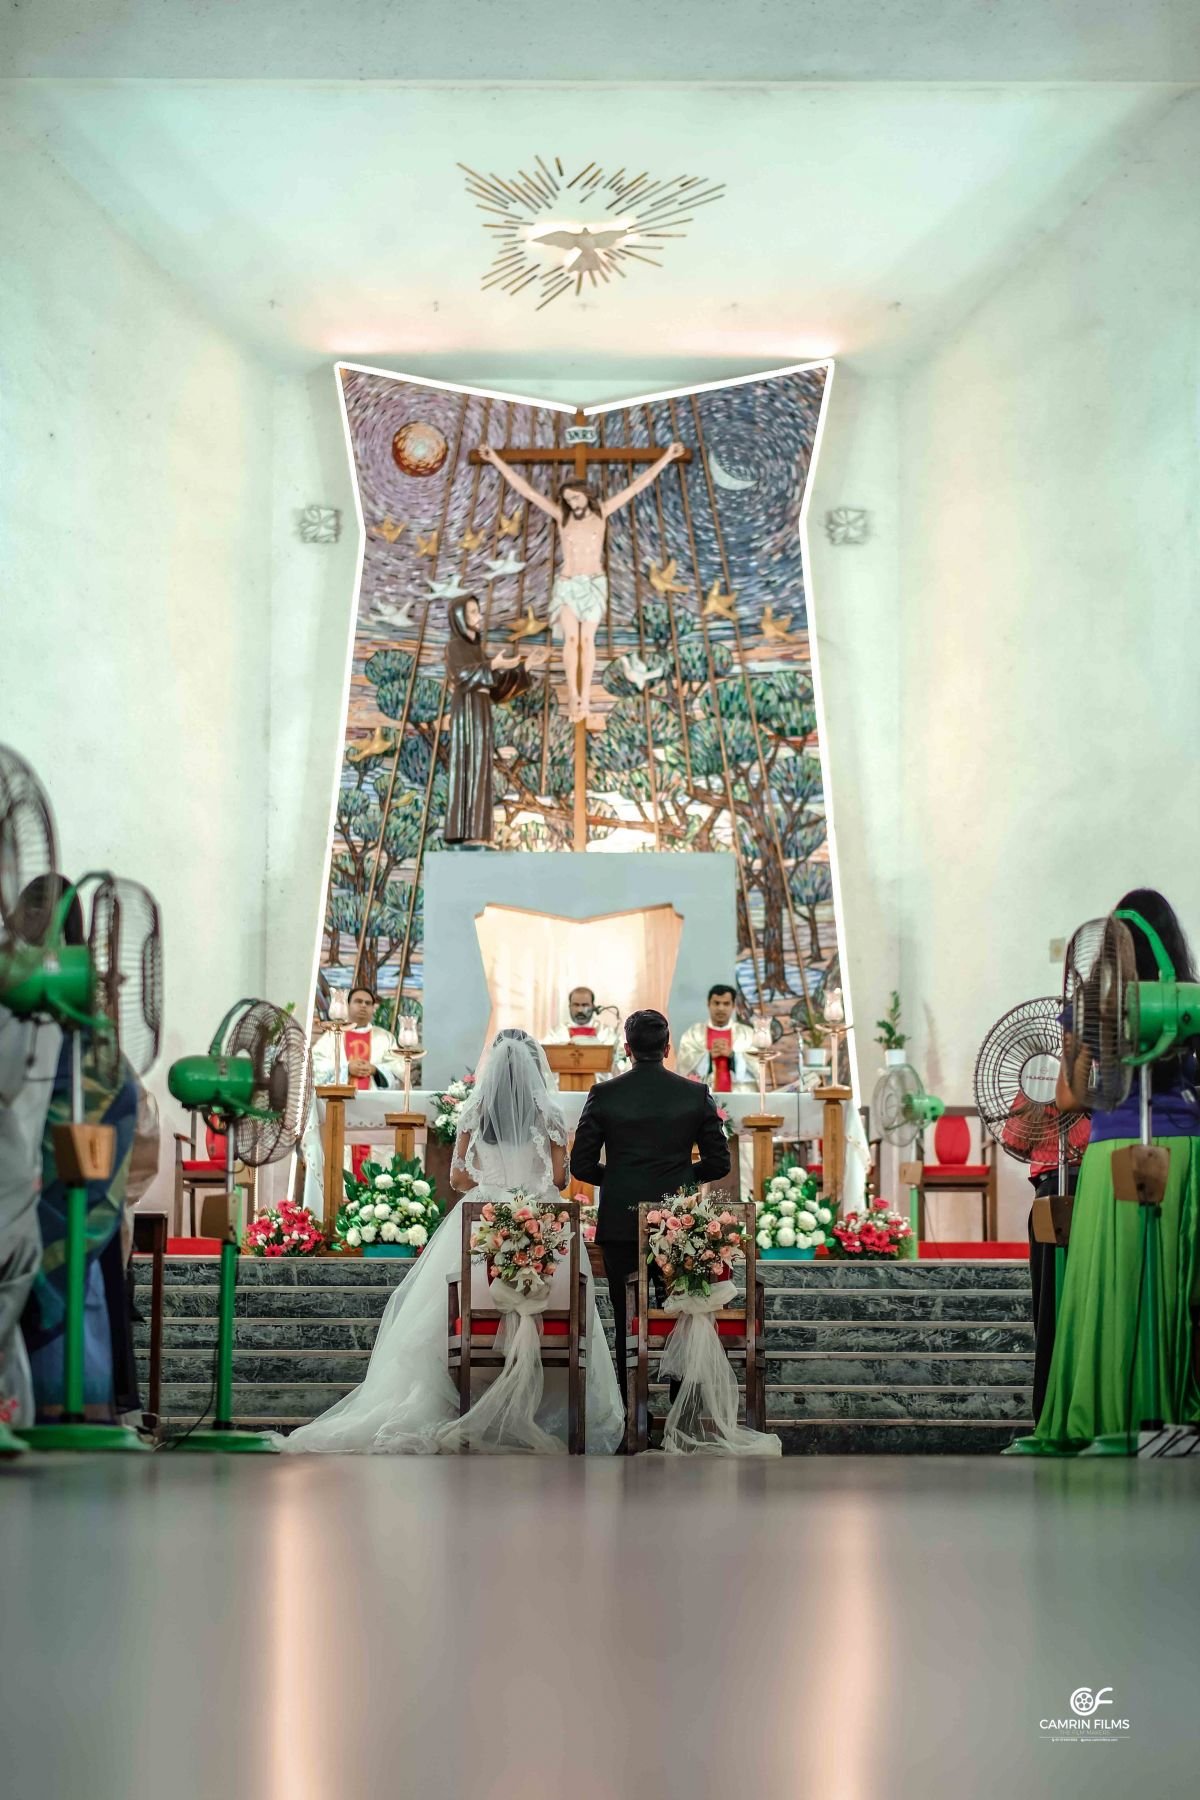 Bride And Groom On Church